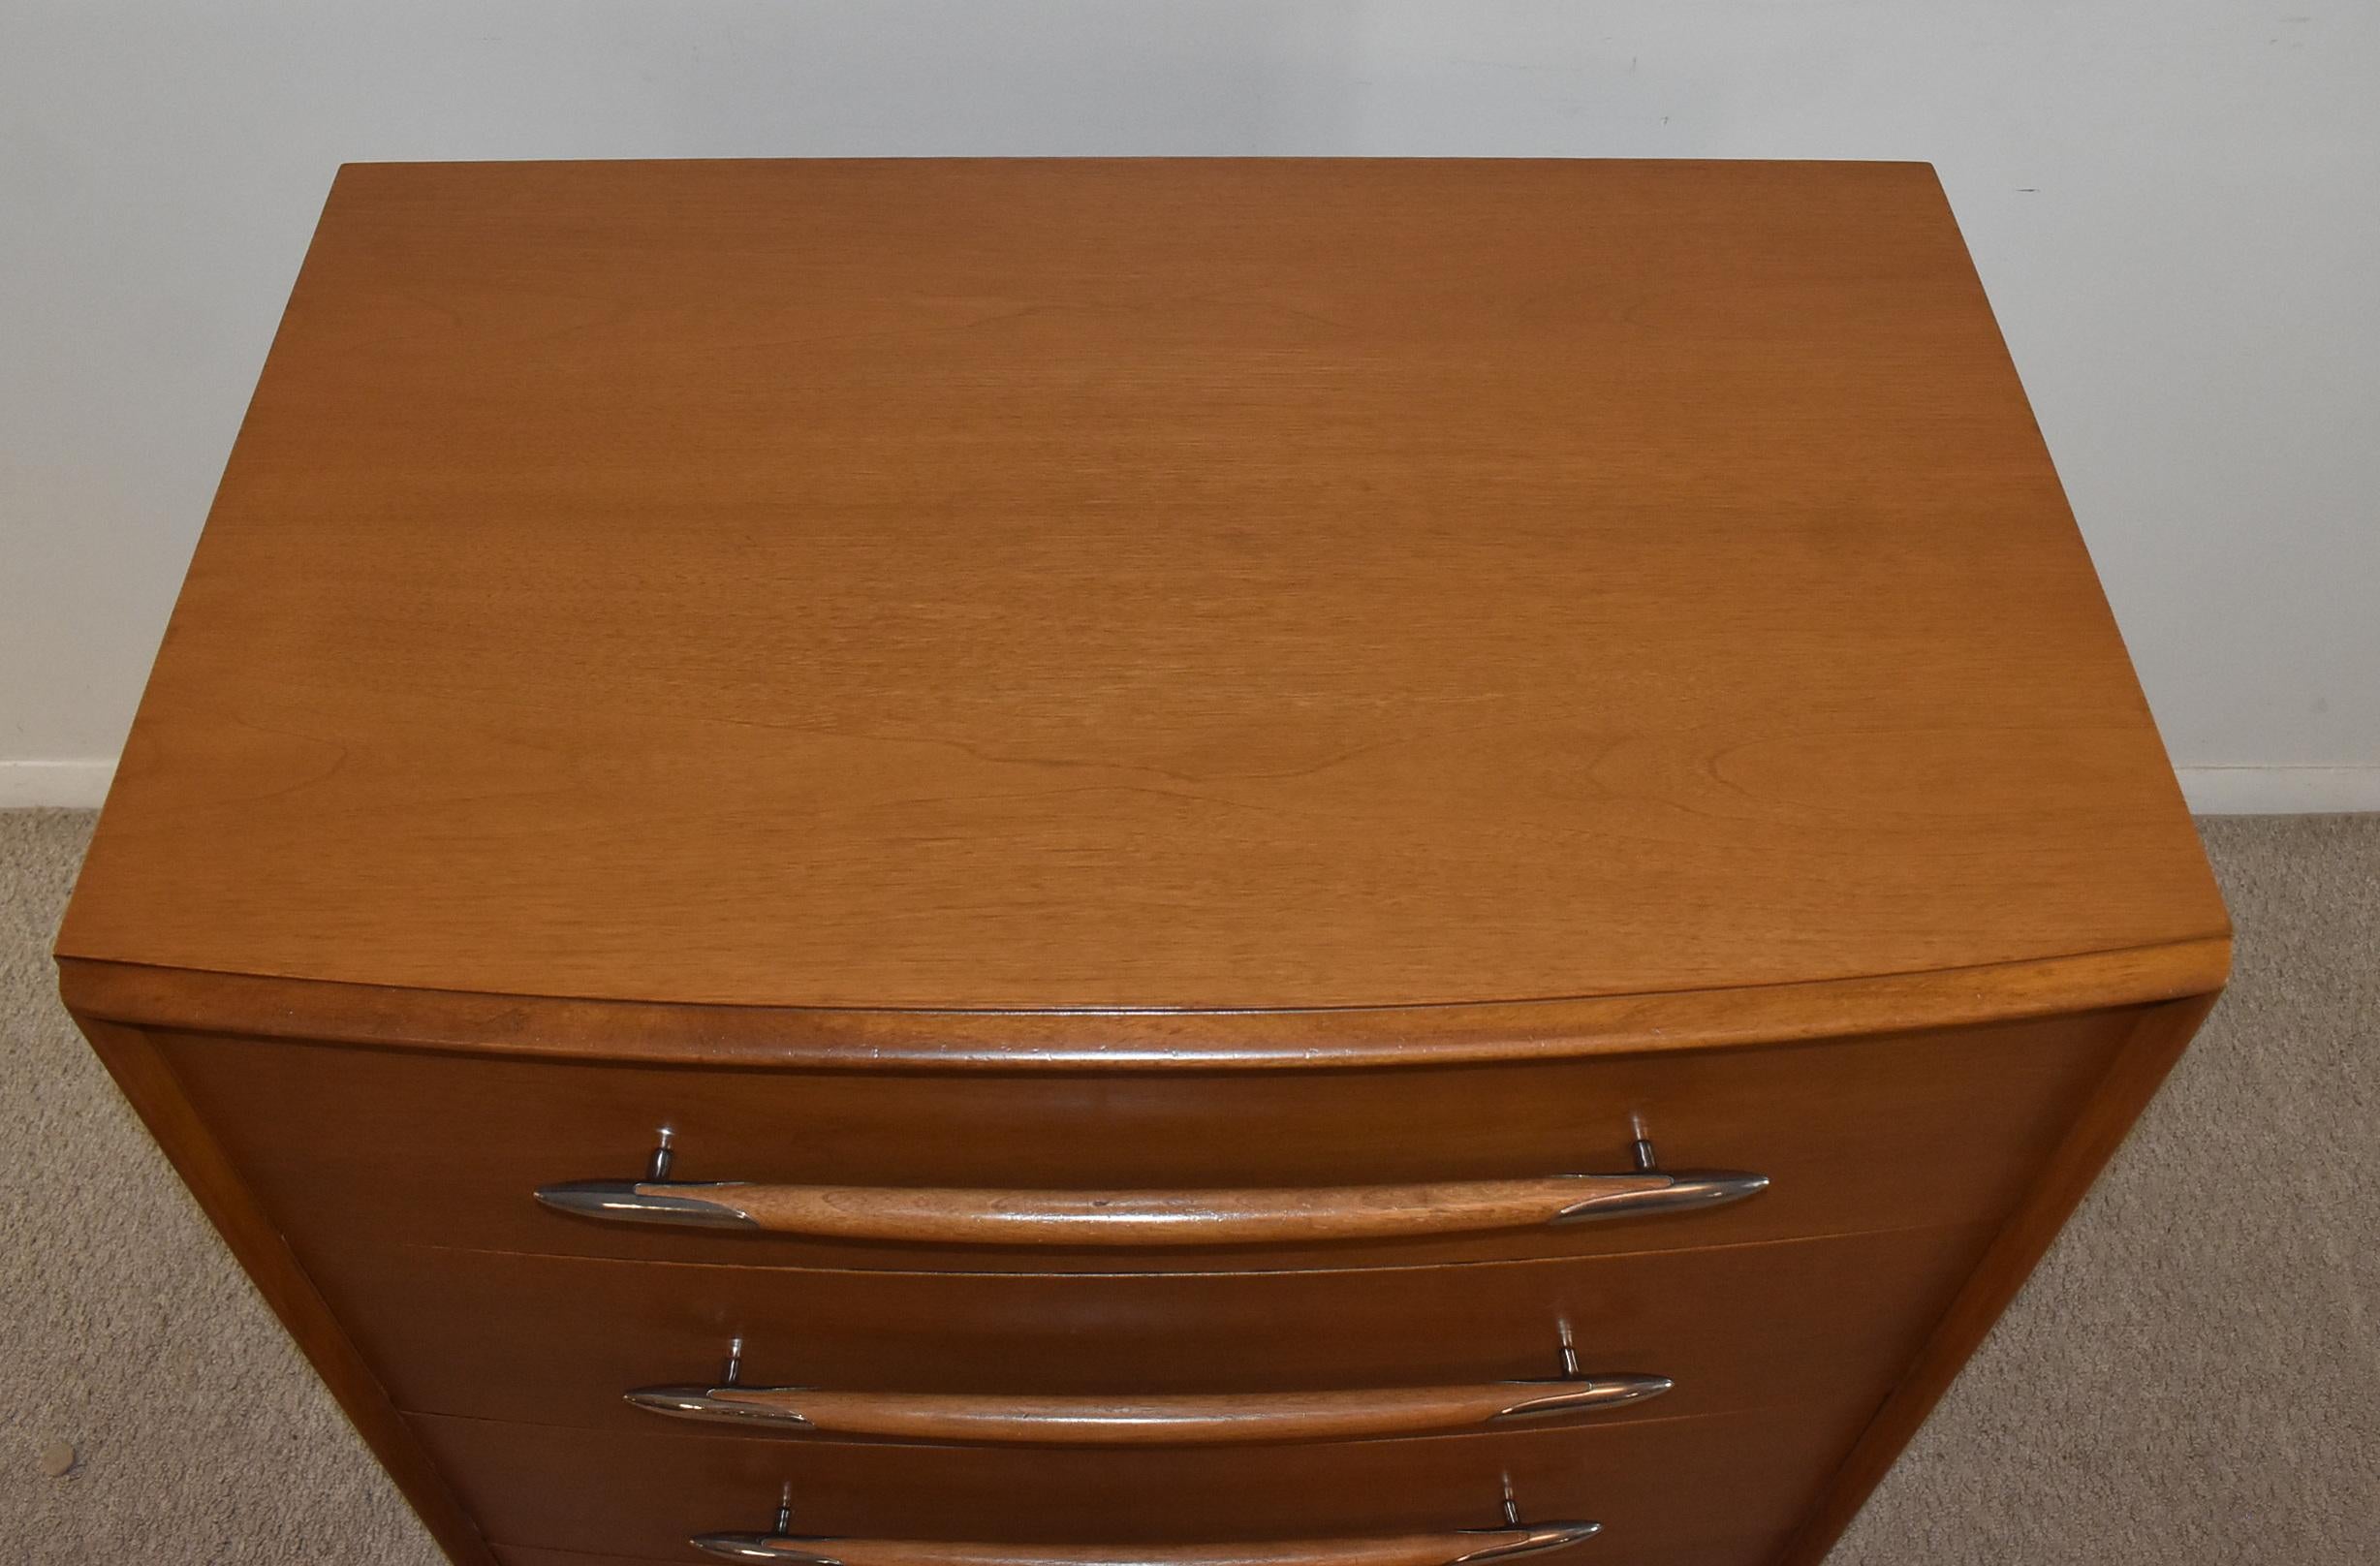 Elegant mid-century modern walnut dresser by T.H. Robsjohn-Gibbings for Widdicomb features a curved front, captivating spear-shaped silver finish tipped pulls, and 4 drawers. 34